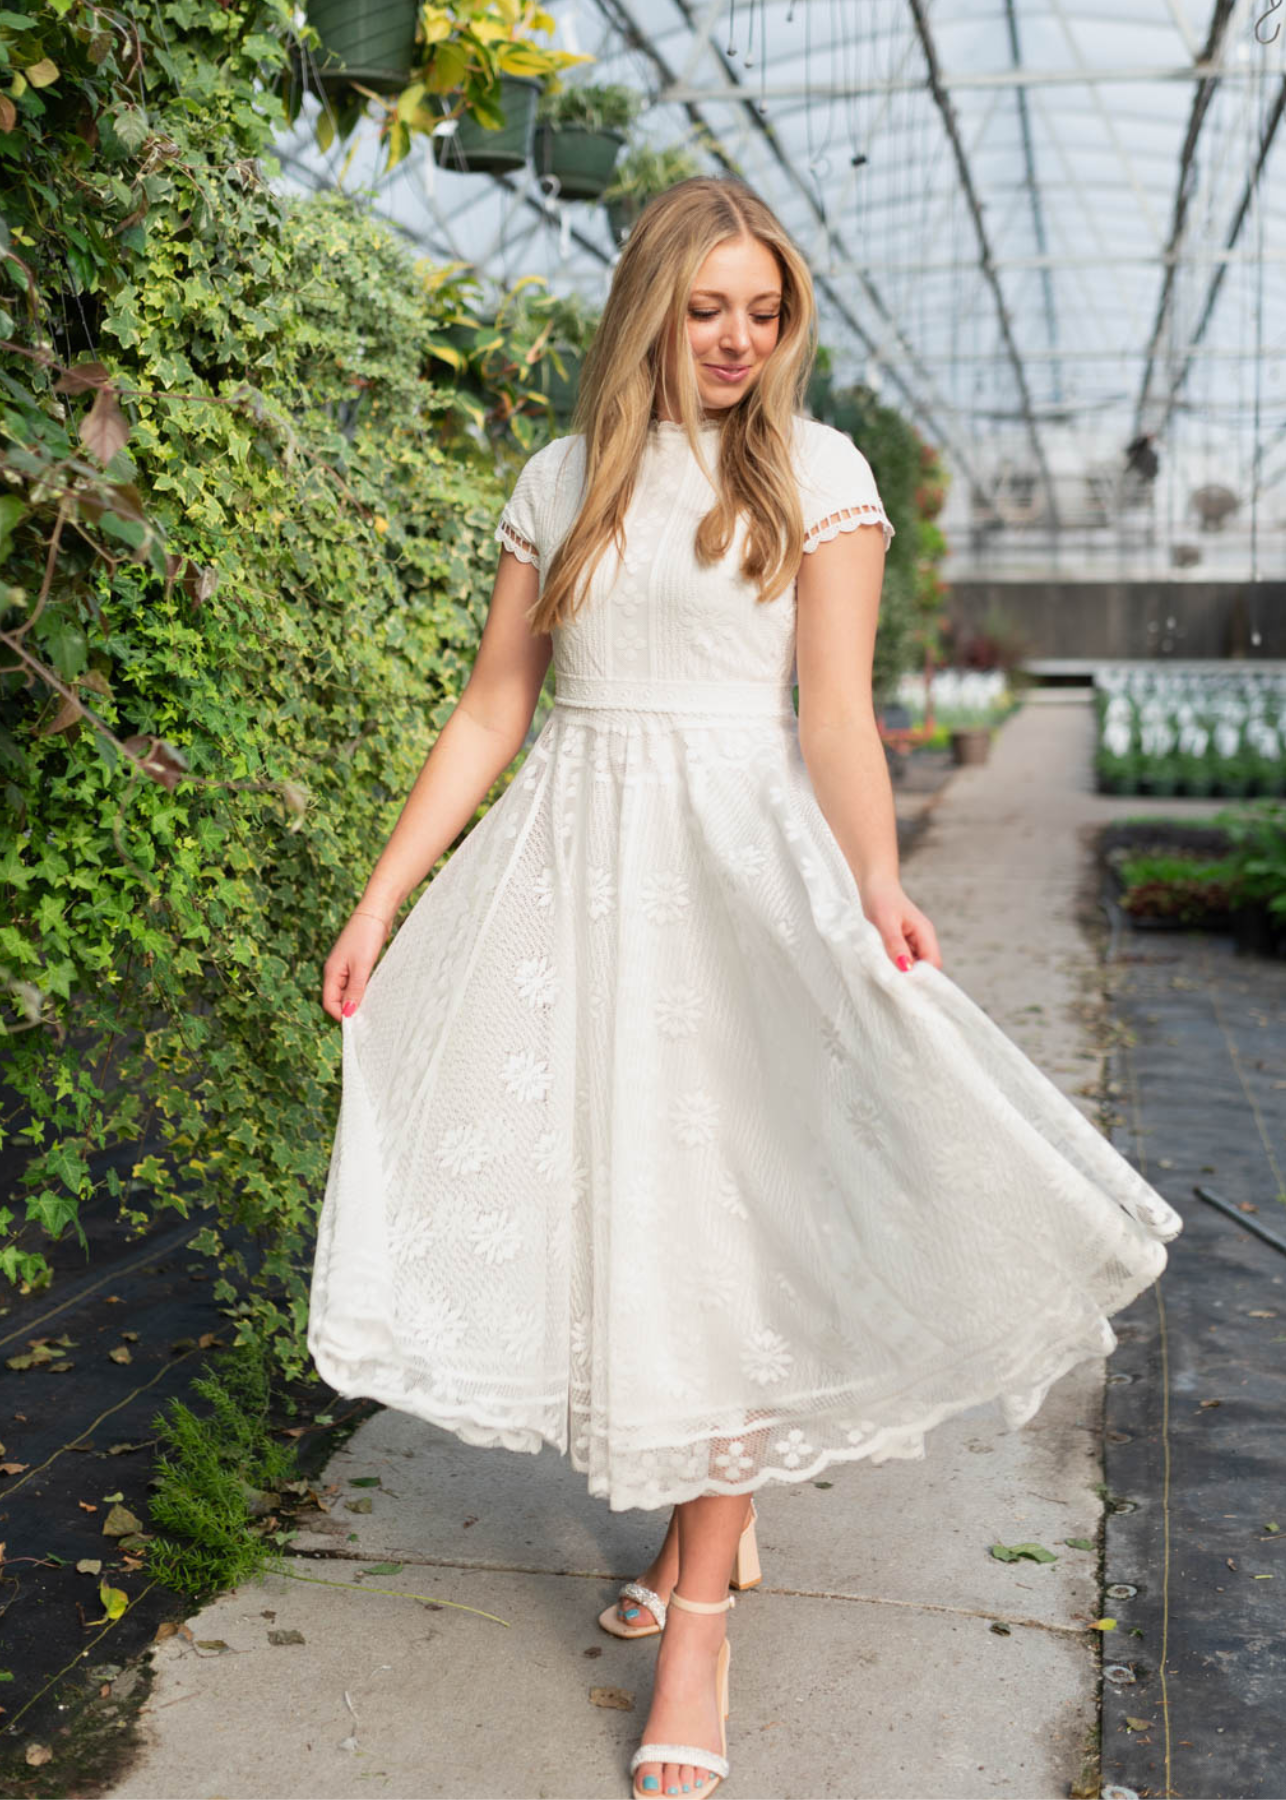 Short sleeve ivory lace dress with a-line skirt